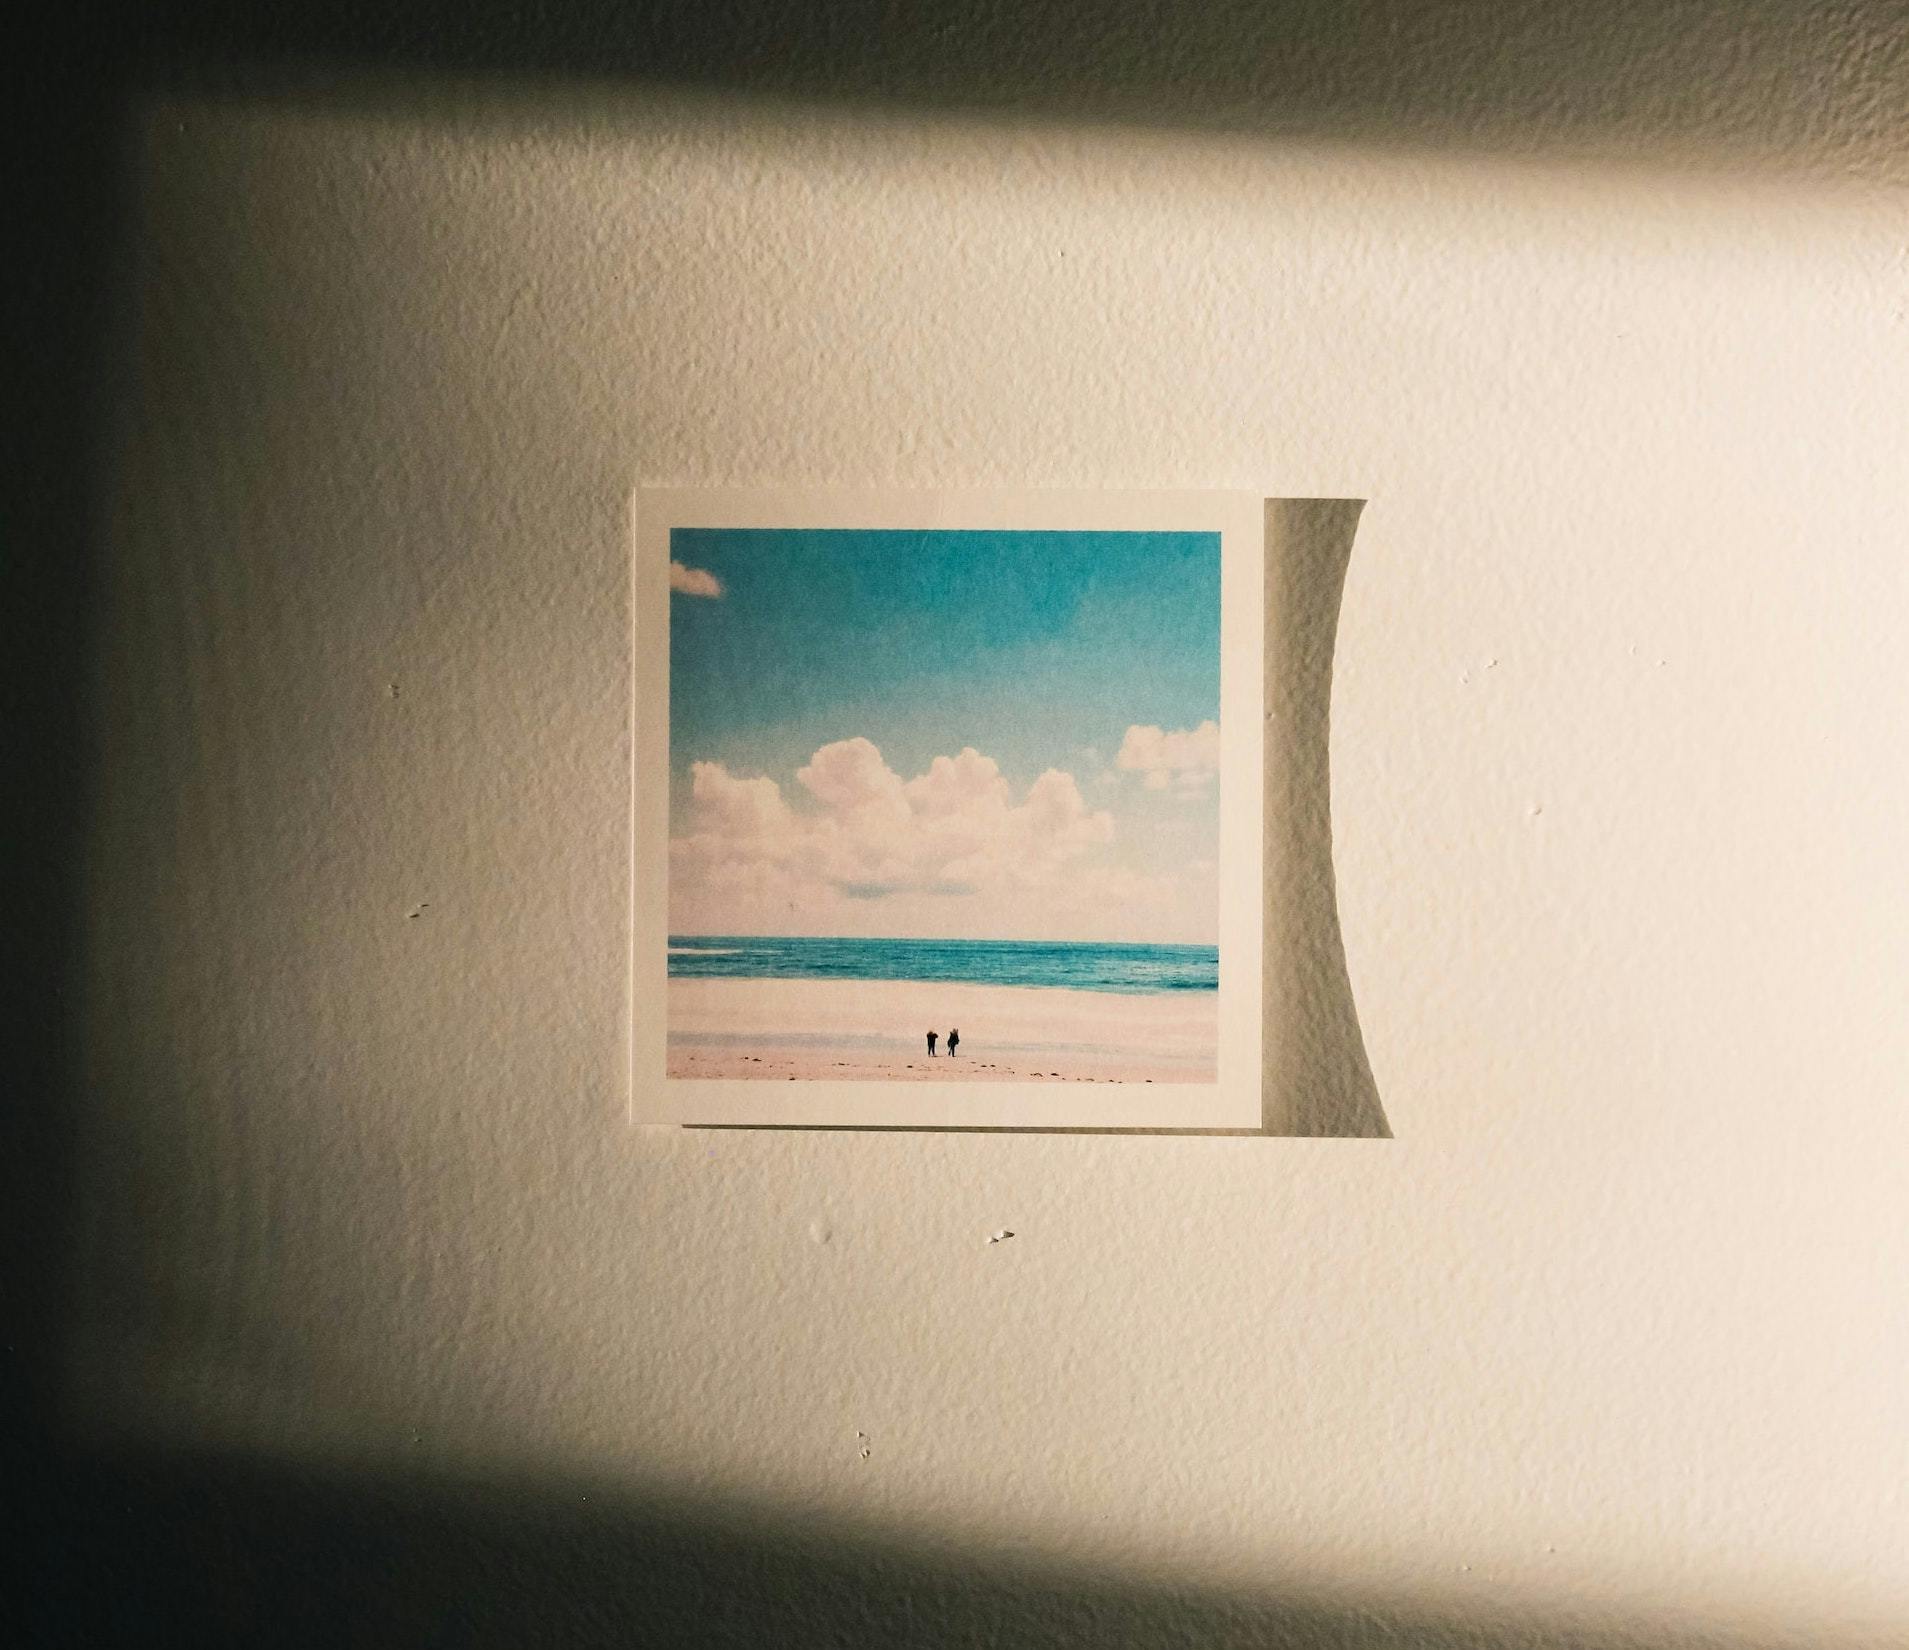 A square printed photograph or artwork of a beach where two small figures are visible is illuminated by warm light streaming through a window onto a wall